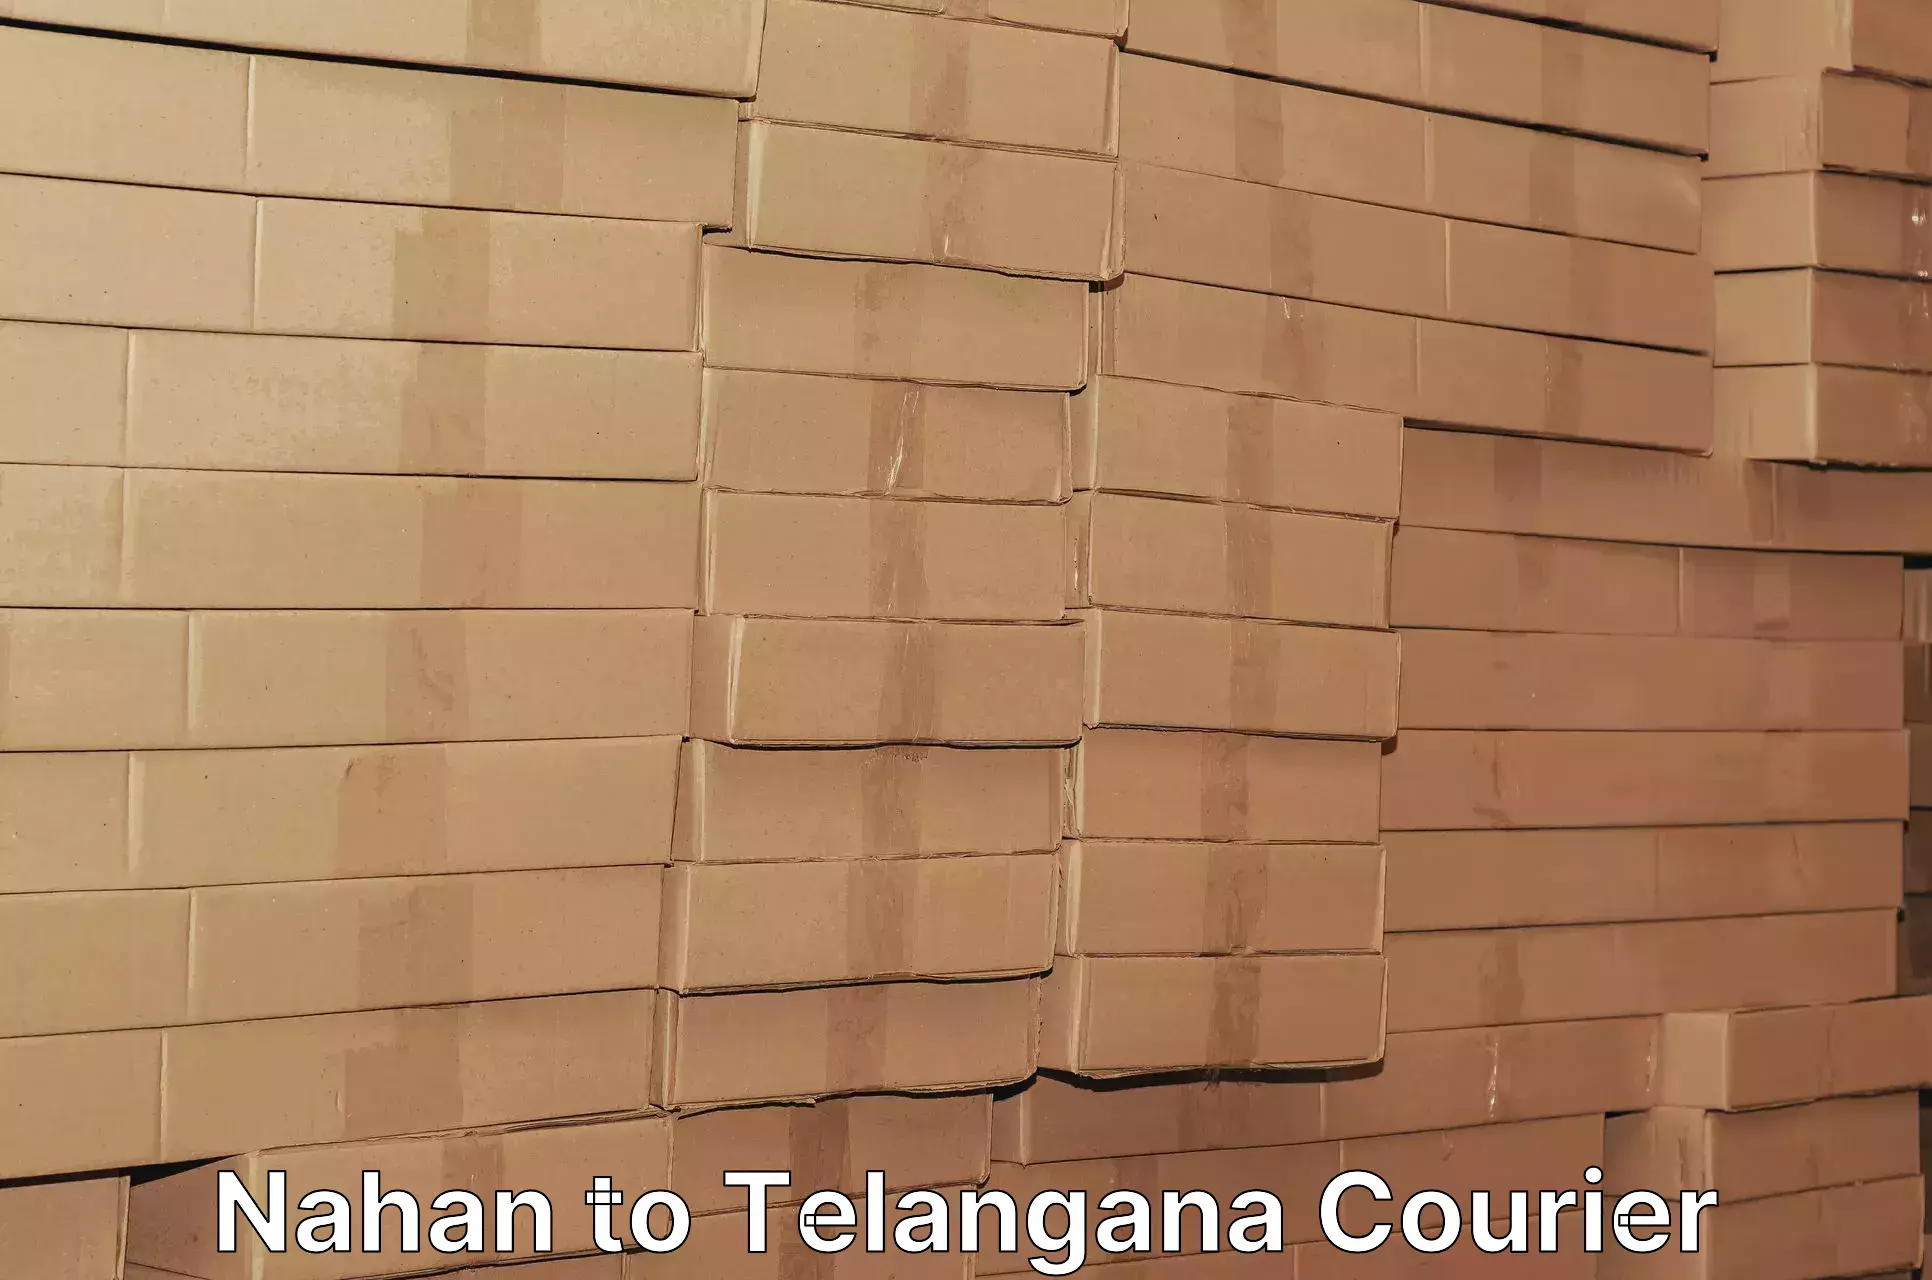 Customer-centric shipping Nahan to Sultanabad